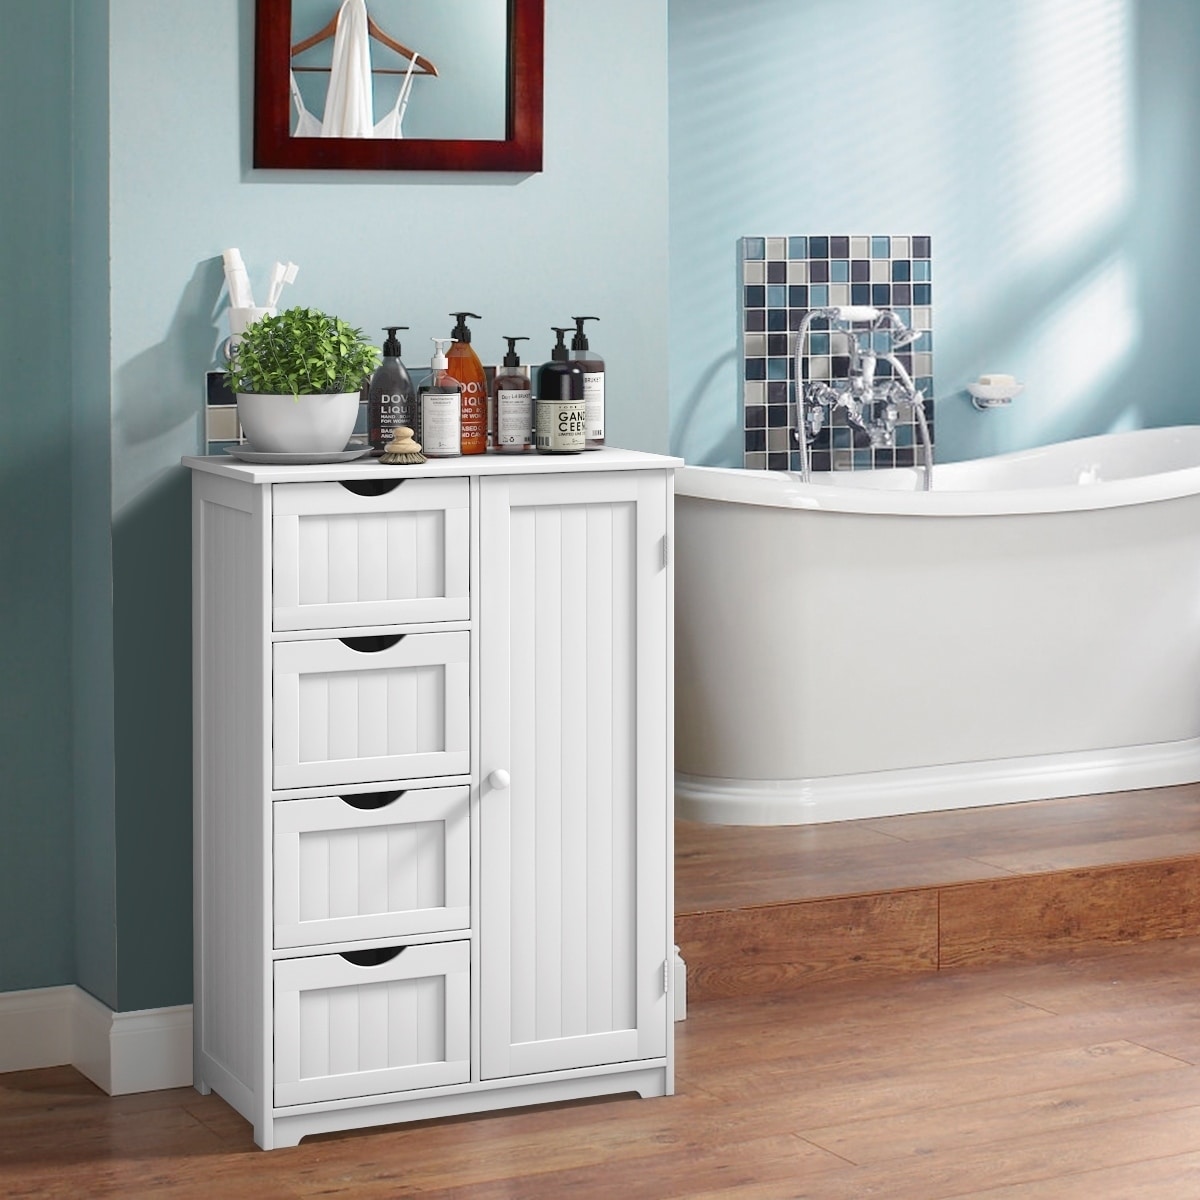 Britoniture White Wooden Bathroom Cabinet with 4 Drawers & Cupboard Storage Unit Bathroom Bedroom 